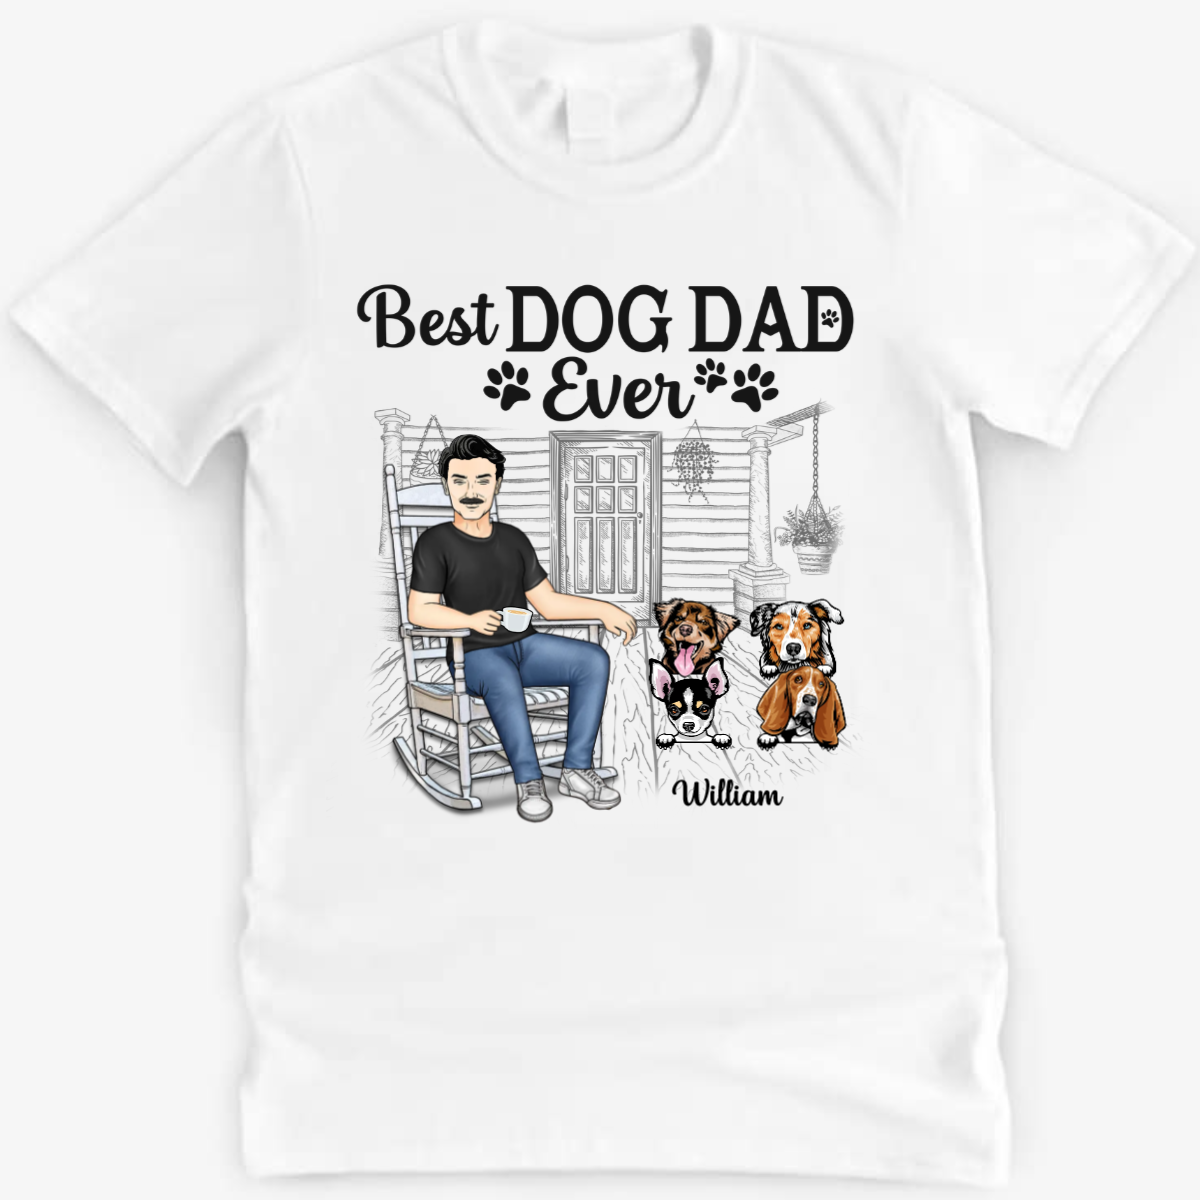 Best Dog Dad Ever - Father Gifts - Personalized Custom T Shirt